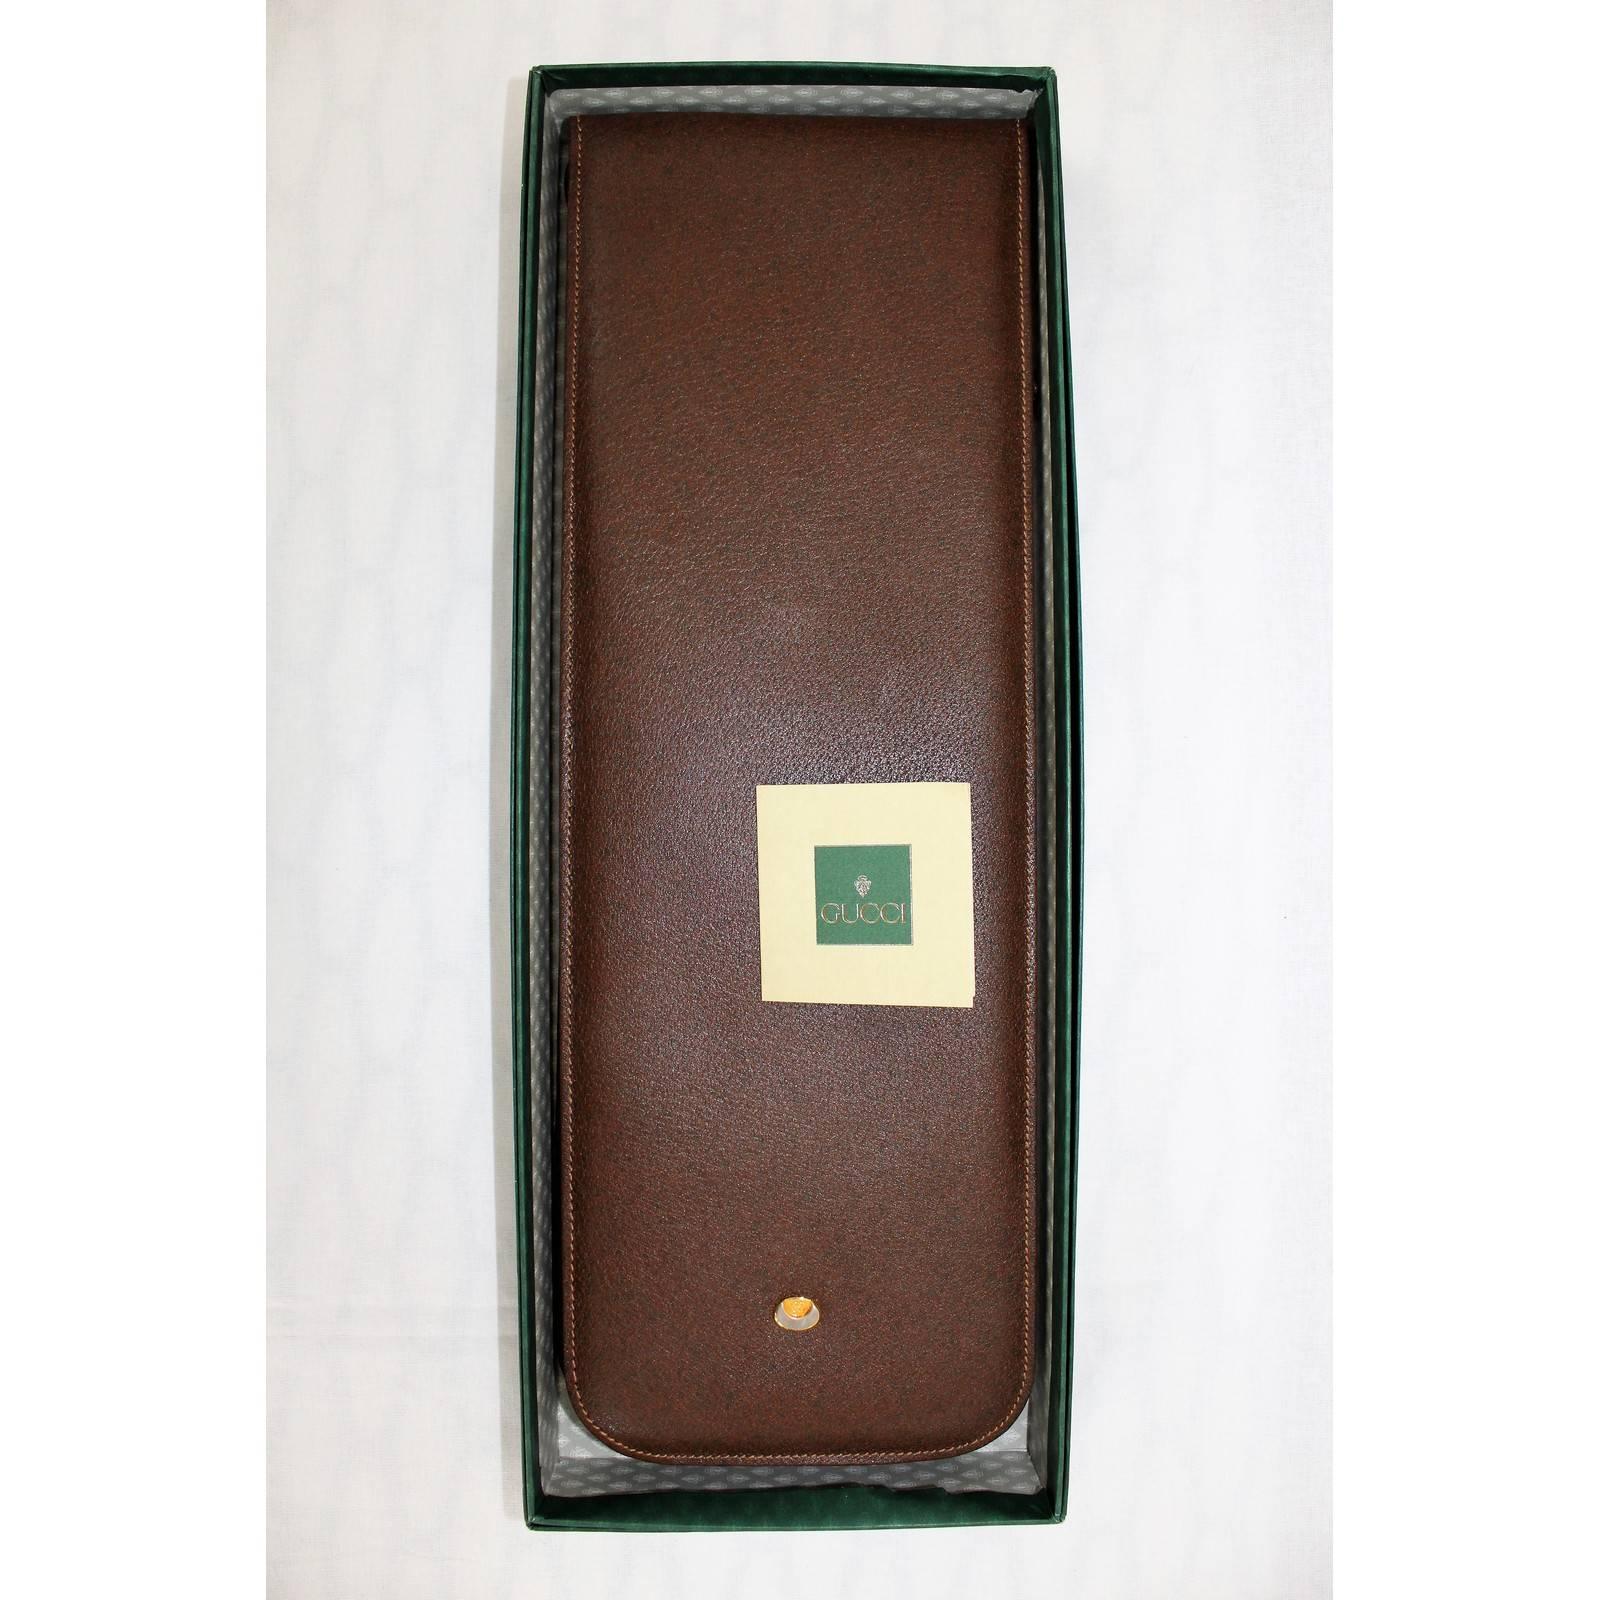 Gucci travel tie holder (1980), with original box and authenticity tag Brown leather, green velvet lining, internal gilt-metal tie rack Excellent vintage conditions, as new.

Measurements:
Length: 43 cm.
Width: 15 cm.

Material: Leather
Colour: